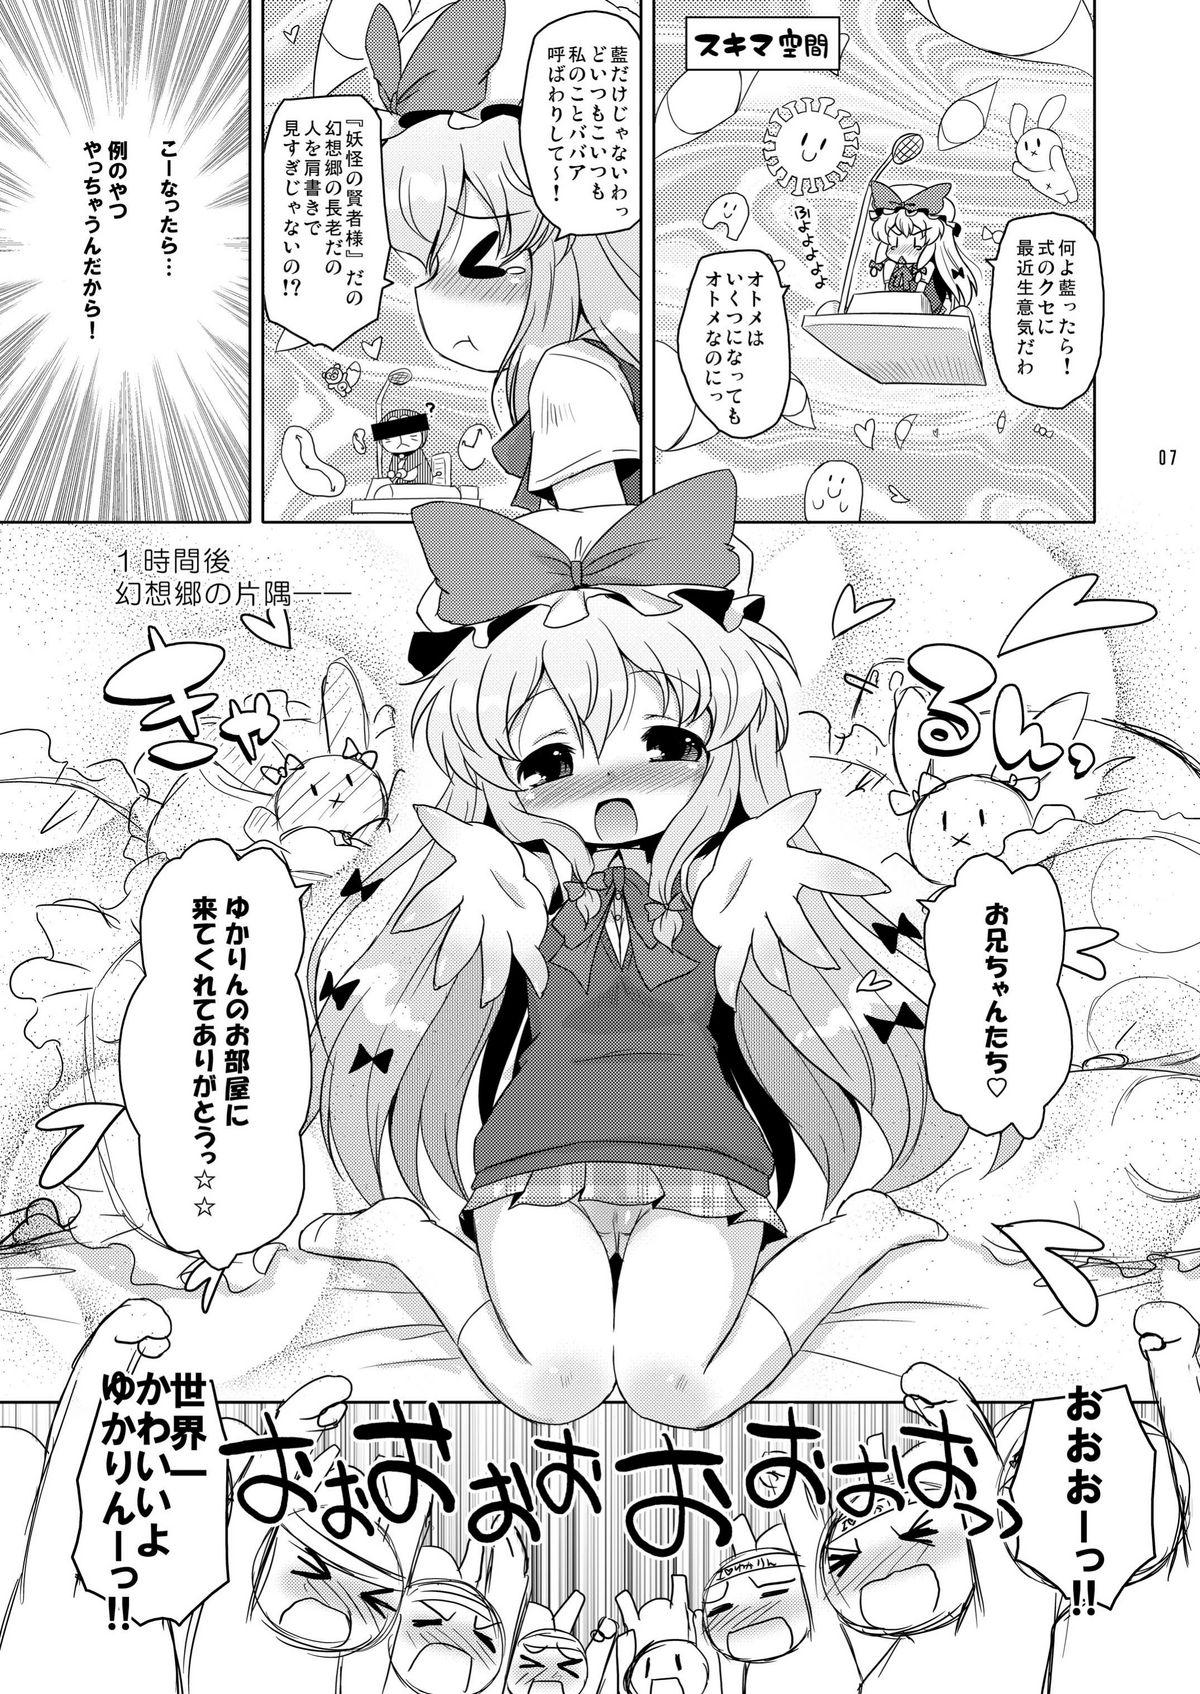 Spy Cam Love Me! Fancy Baby Doll - Touhou project Banging - Page 7